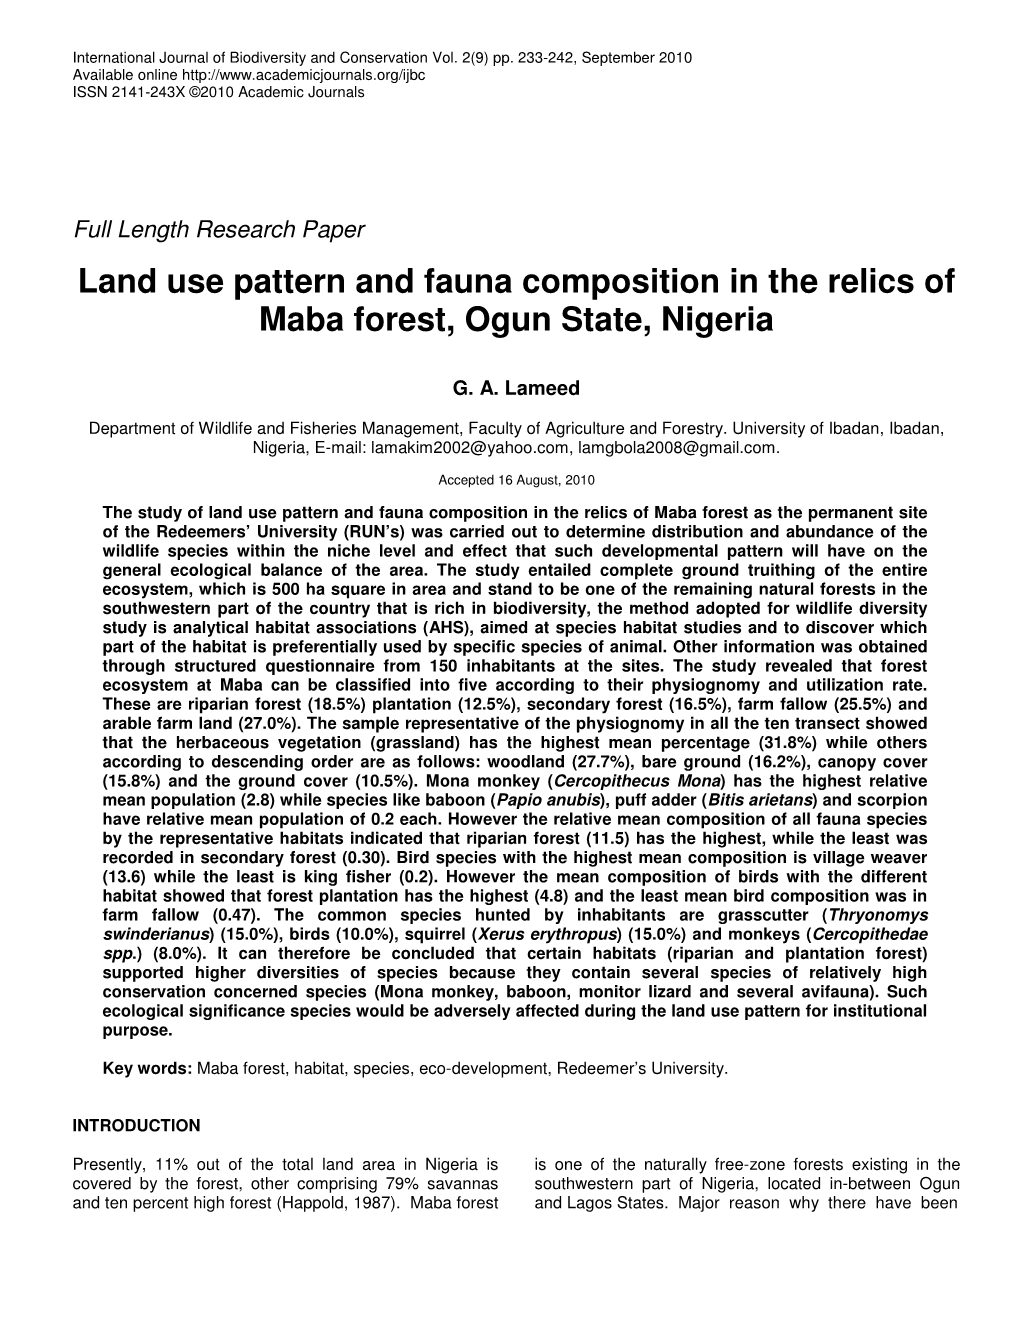 Land Use Pattern and Fauna Composition in the Relics of Maba Forest, Ogun State, Nigeria